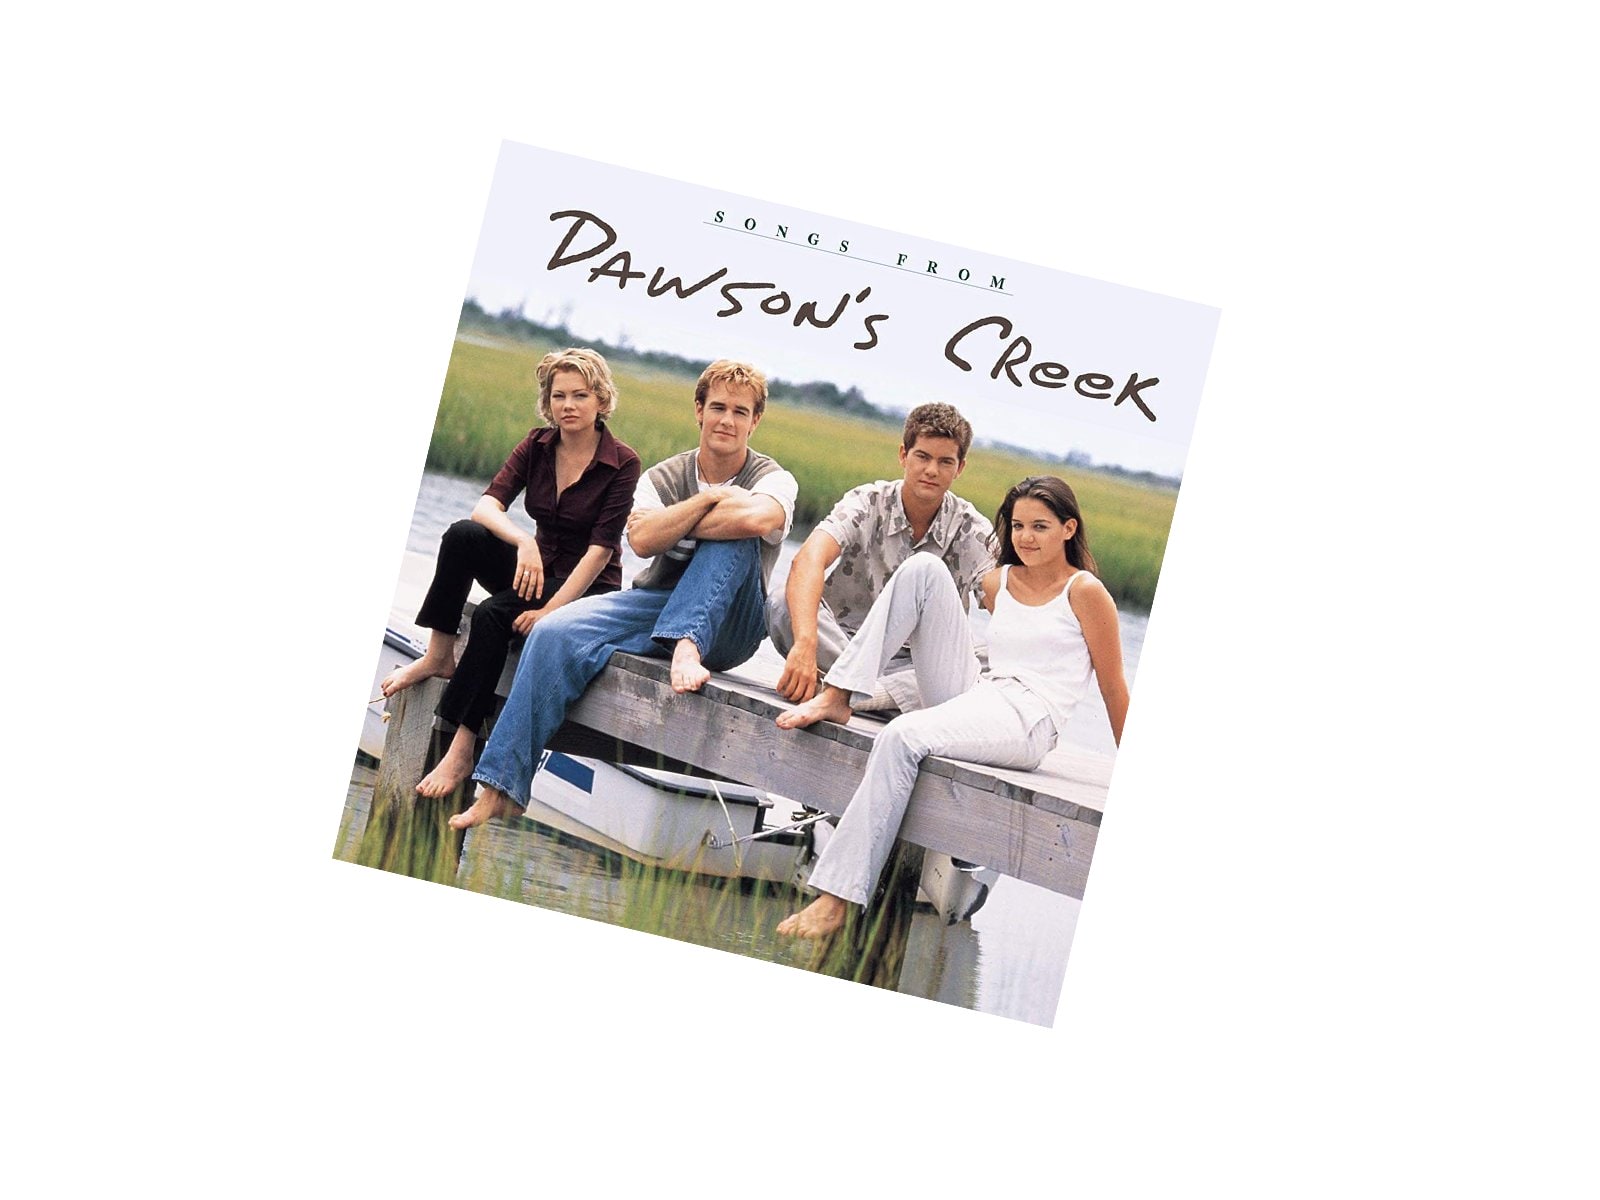 Songs from Dawson's Creek CD cover